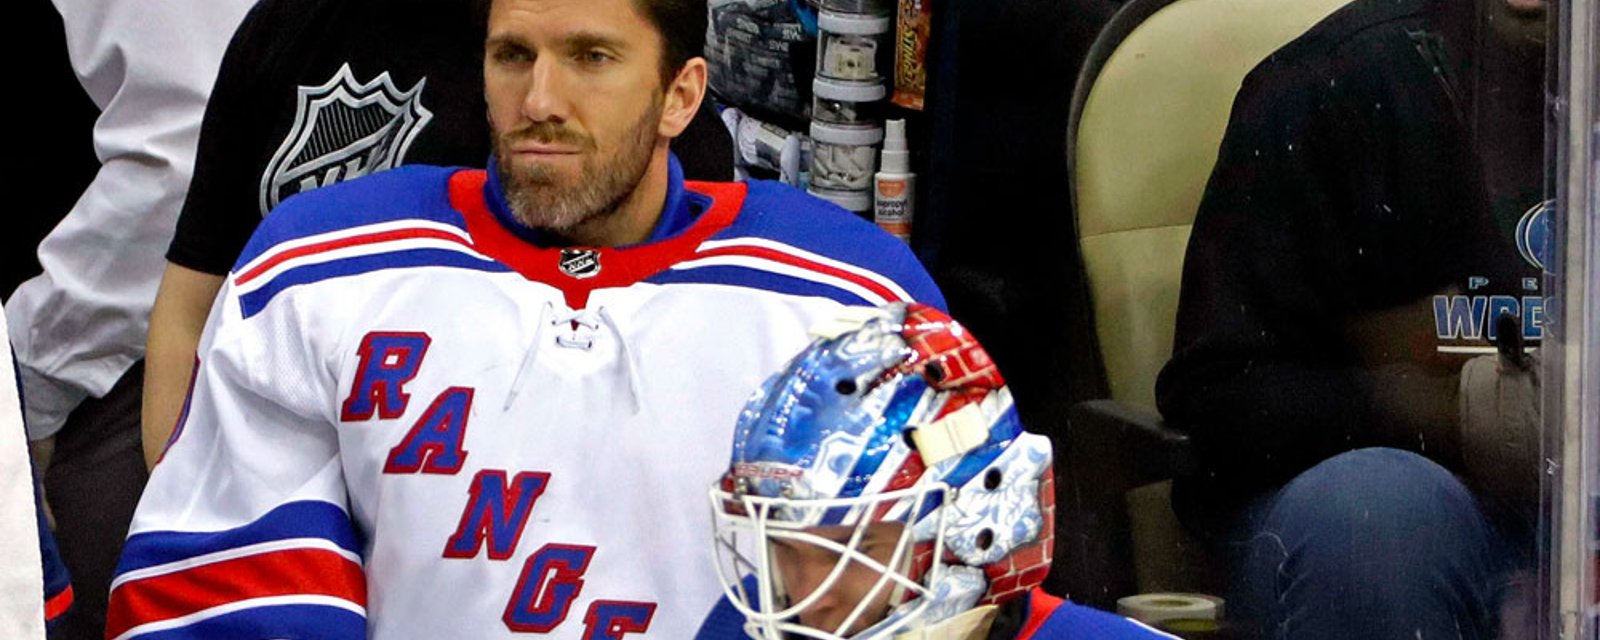 Rangers cannot confirm Henrik Lundqvist’s role in playoff tournament 